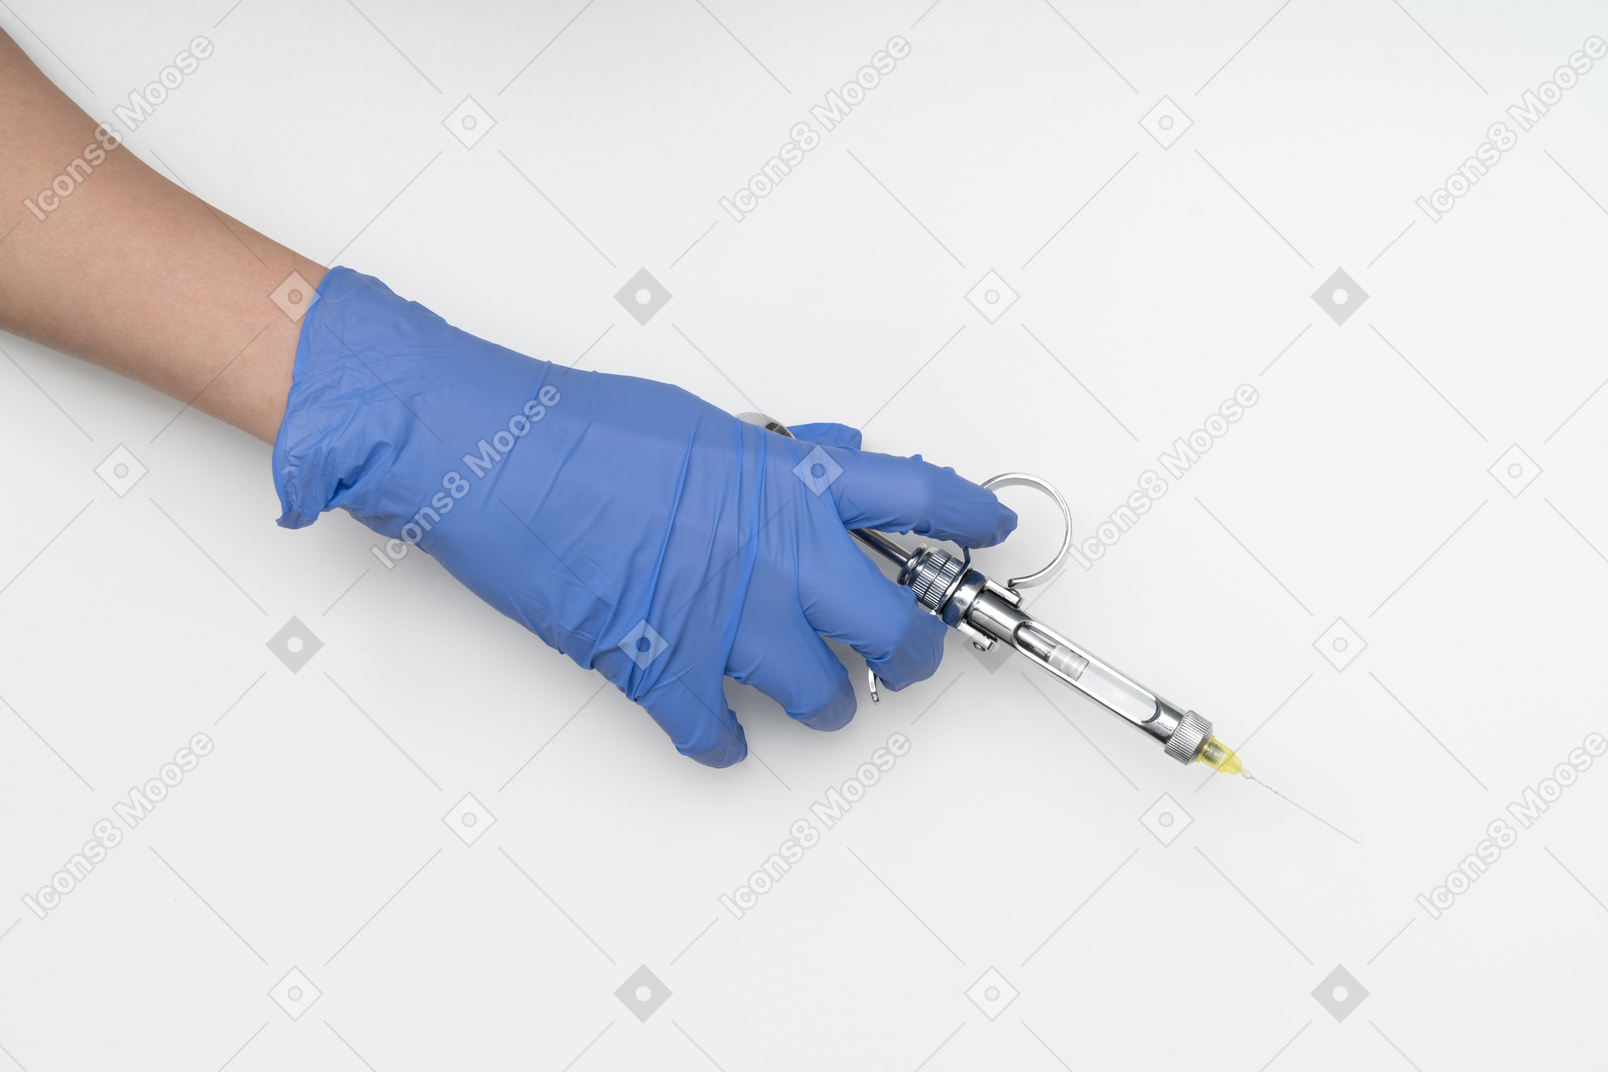 Hand in protective glove holding a syringe